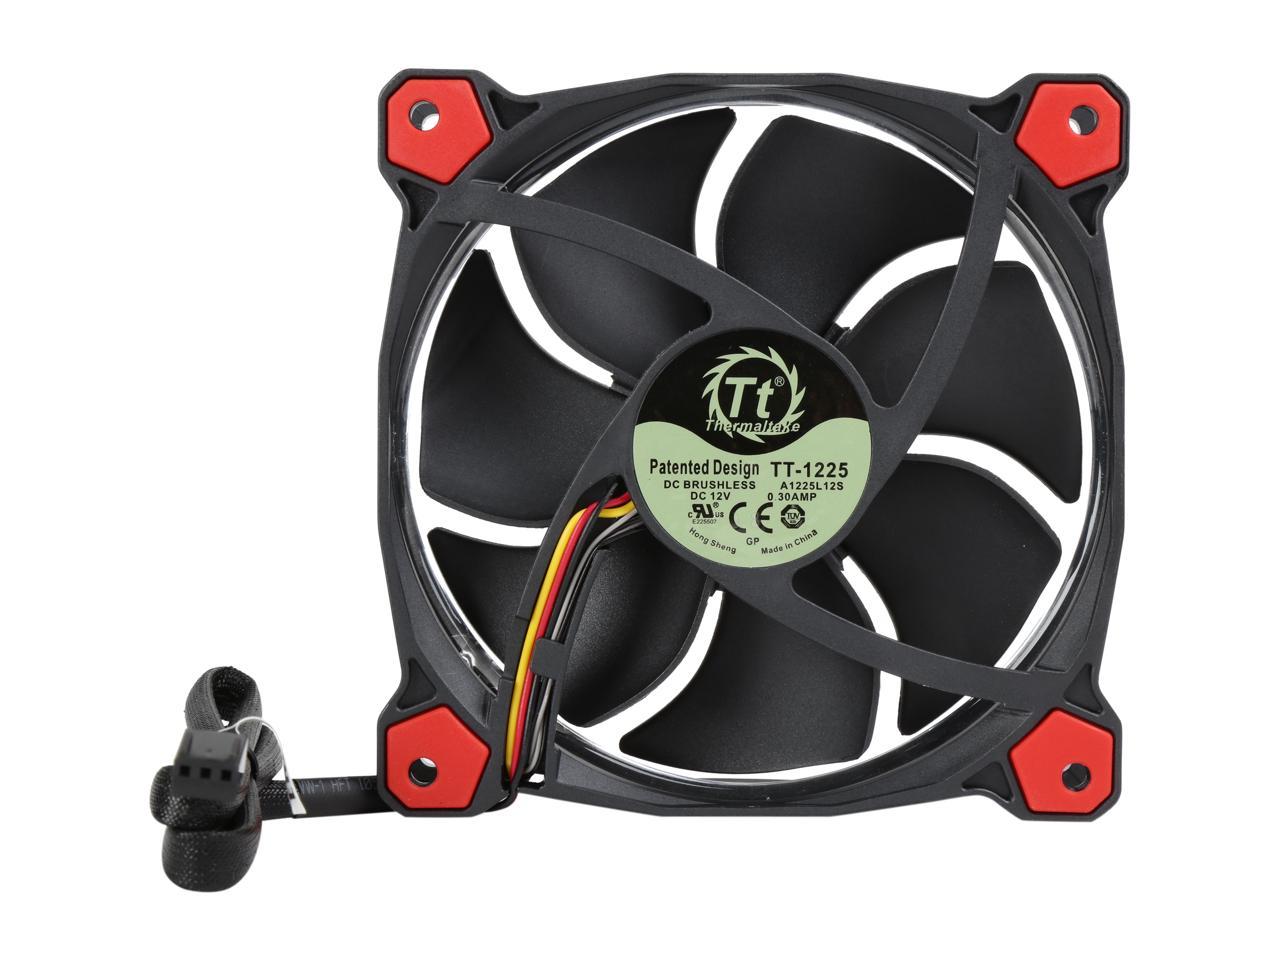 Thermaltake Riing 12 High Static Pressure 120Mm Circular Ring Led Case/Radiator Fan With Anti-Vibration Mounting System - Red - 3 Pks